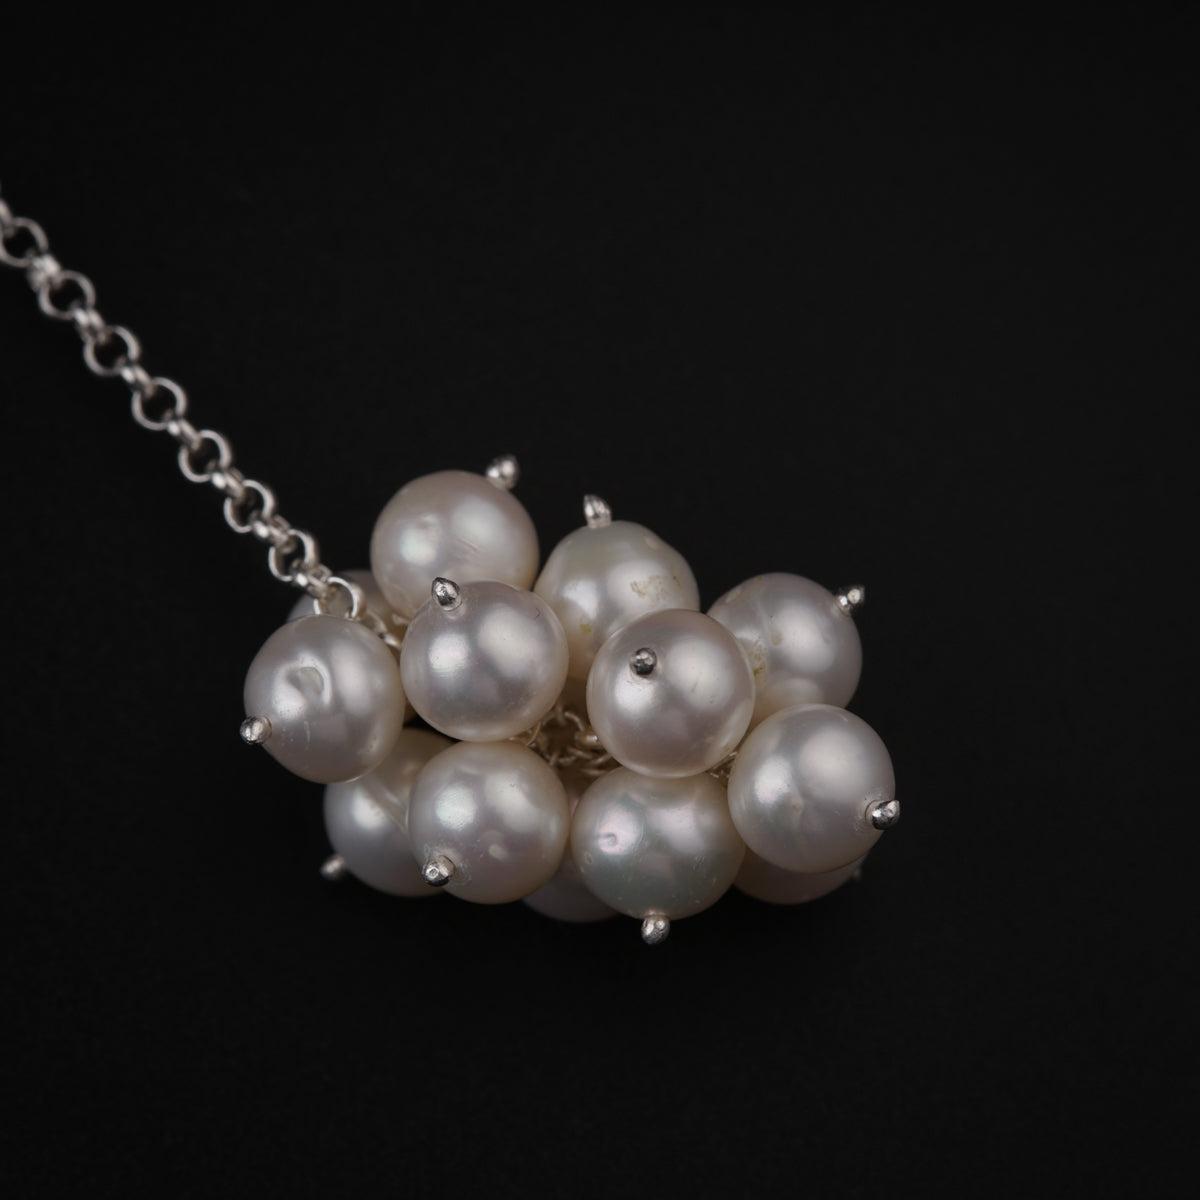 Silver Tie & Wear Necklace with Pearls and Semi Precious Stones